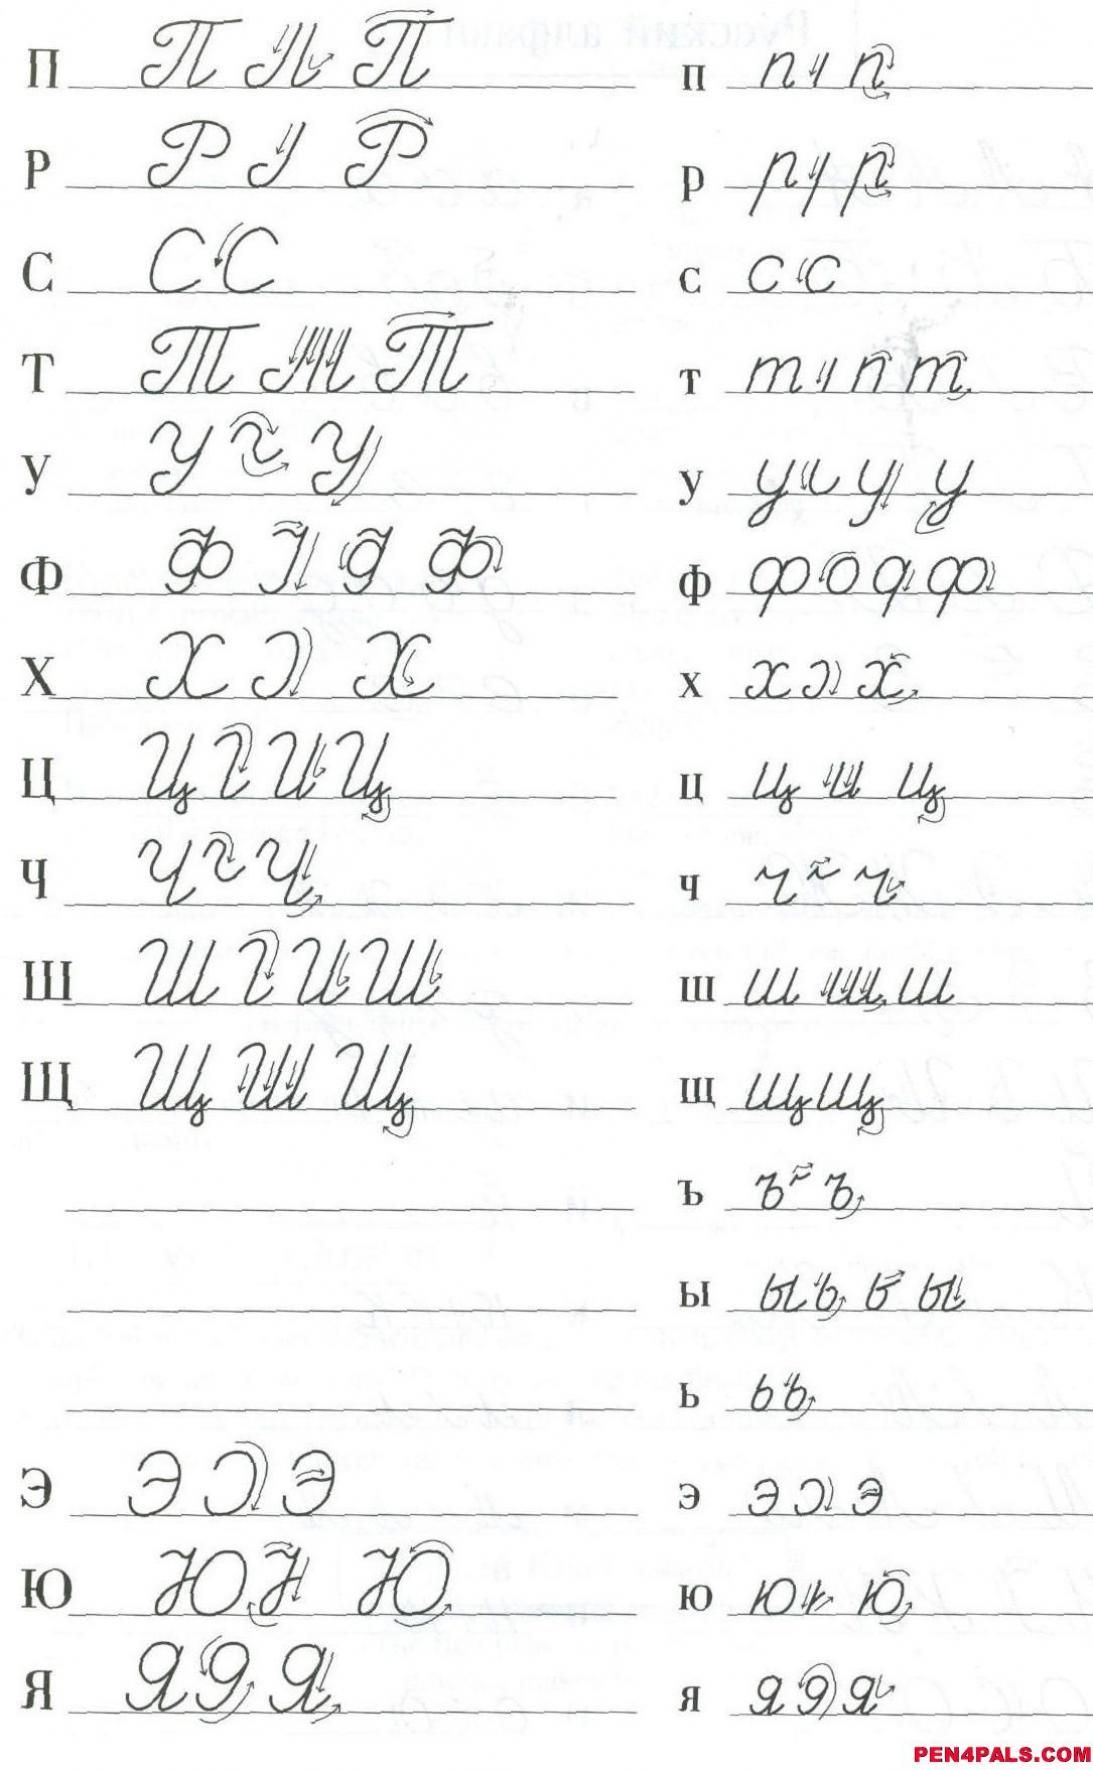 42 Marvelous Cursive Handwriting Practice Sheets For Adults